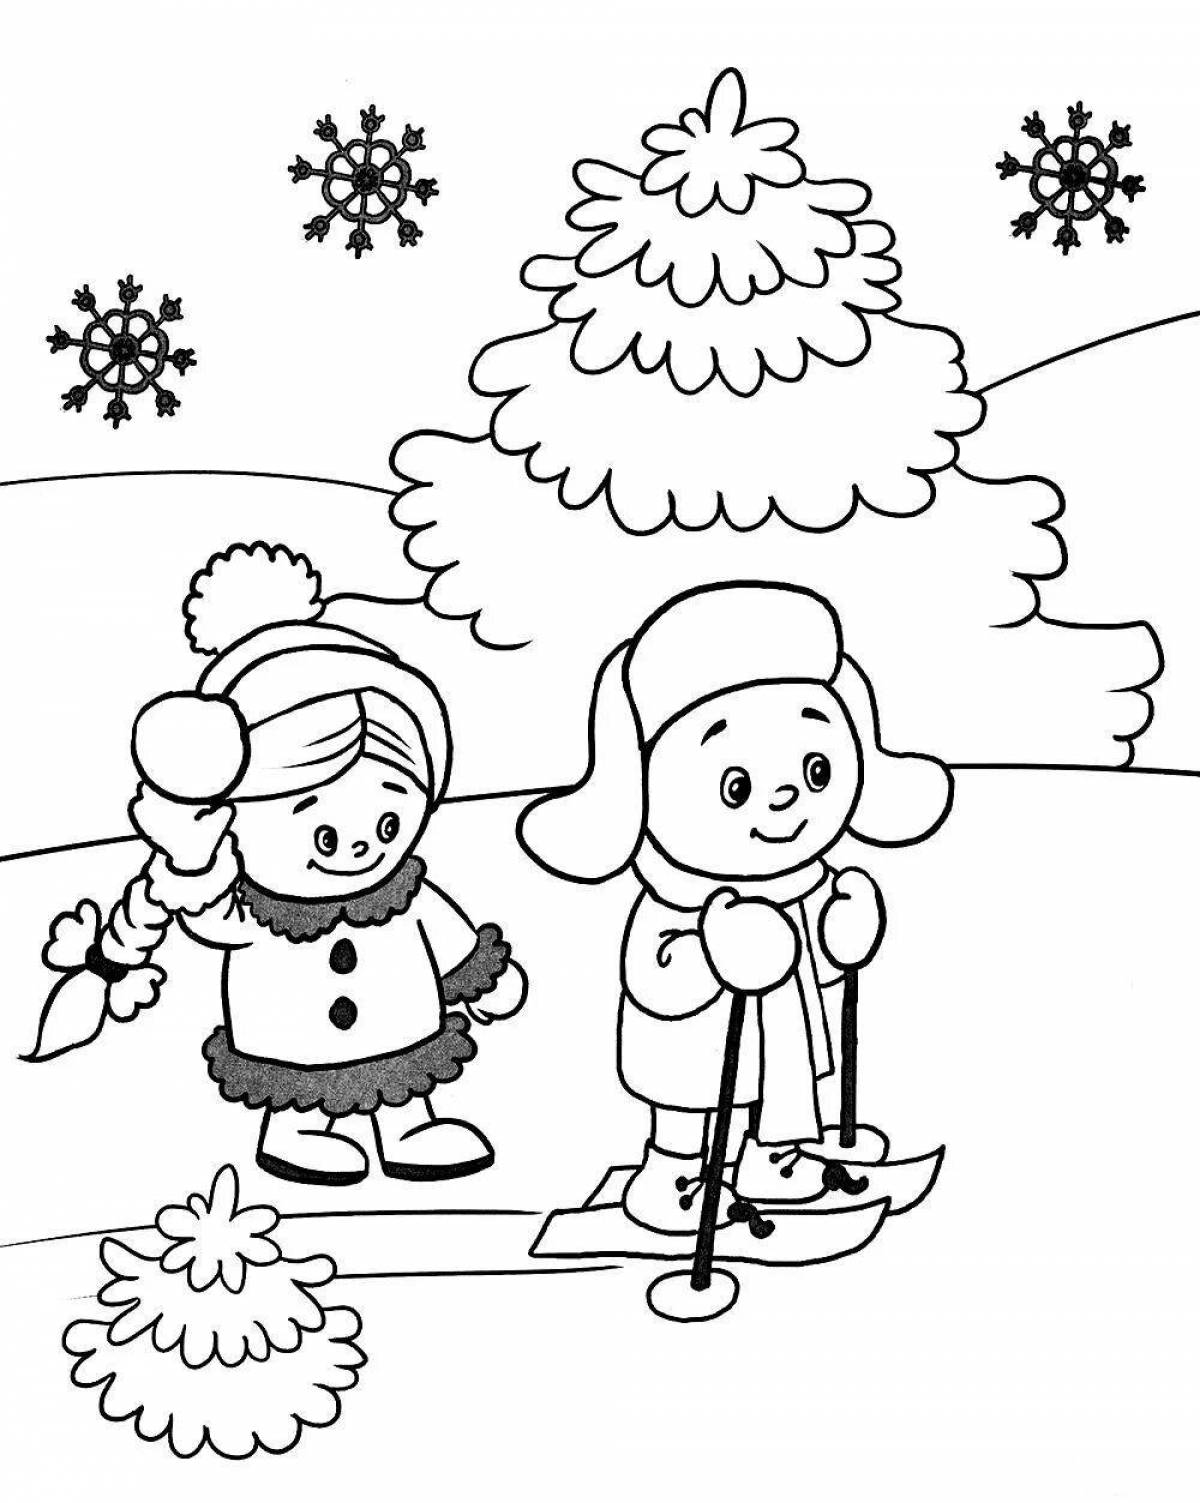 Live winter fun coloring page